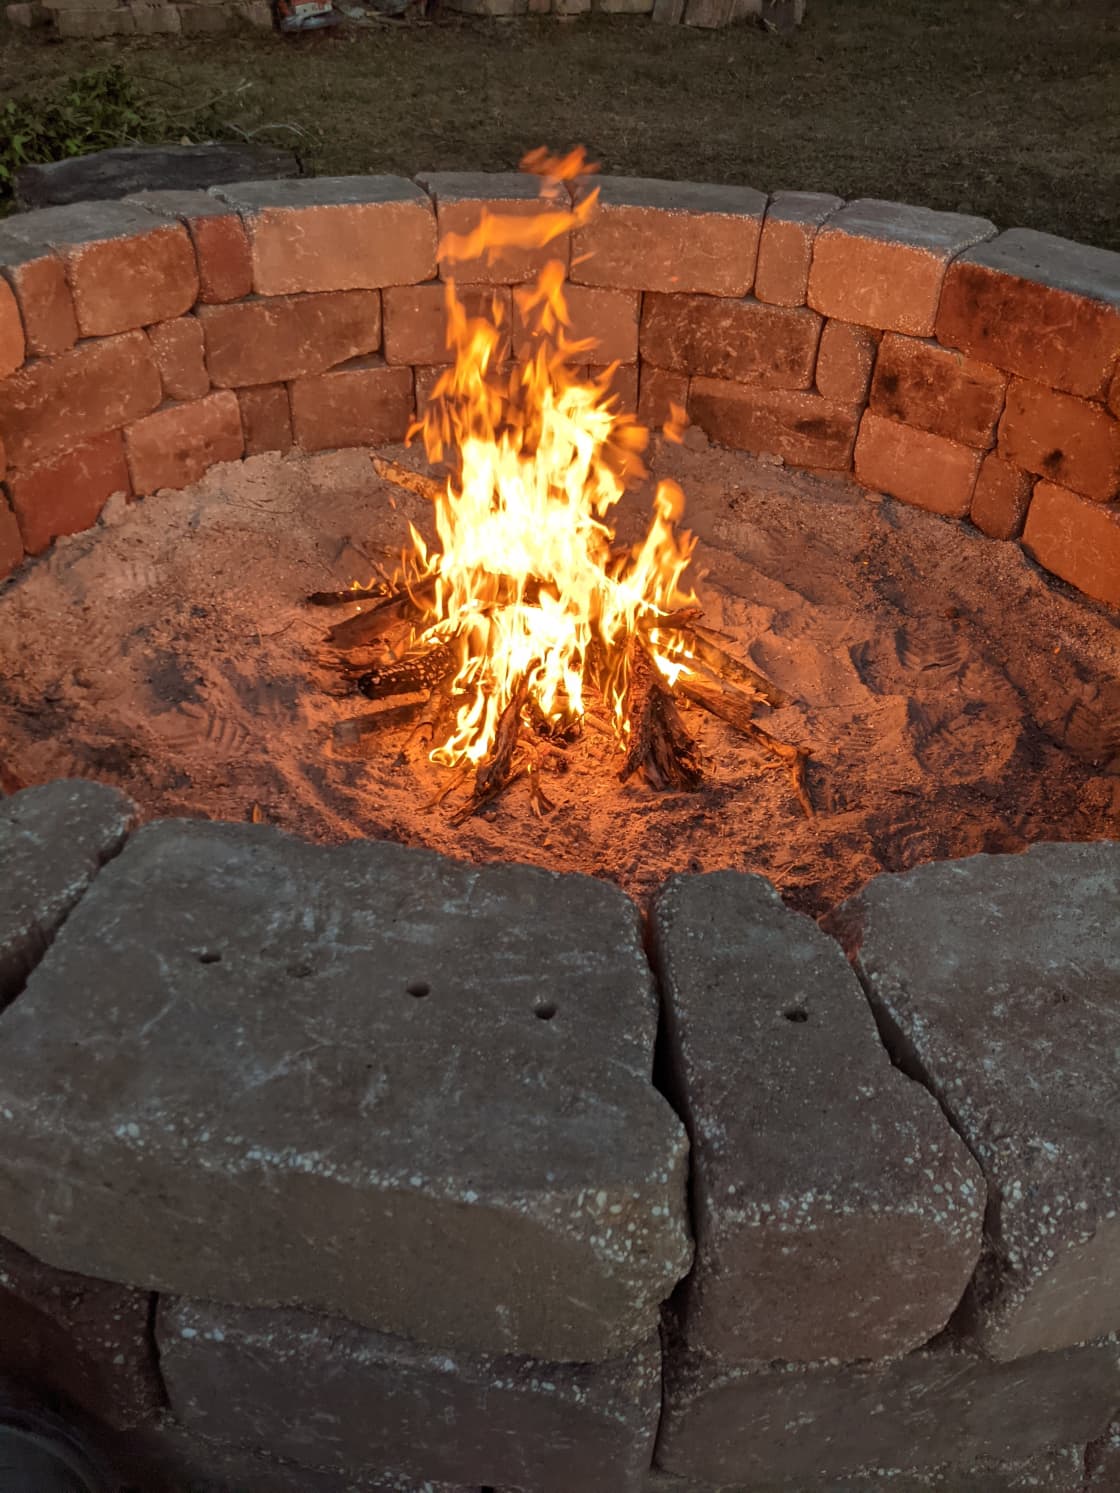 We enjoyed a bonfire on the fire pit provided onsite during our stay.